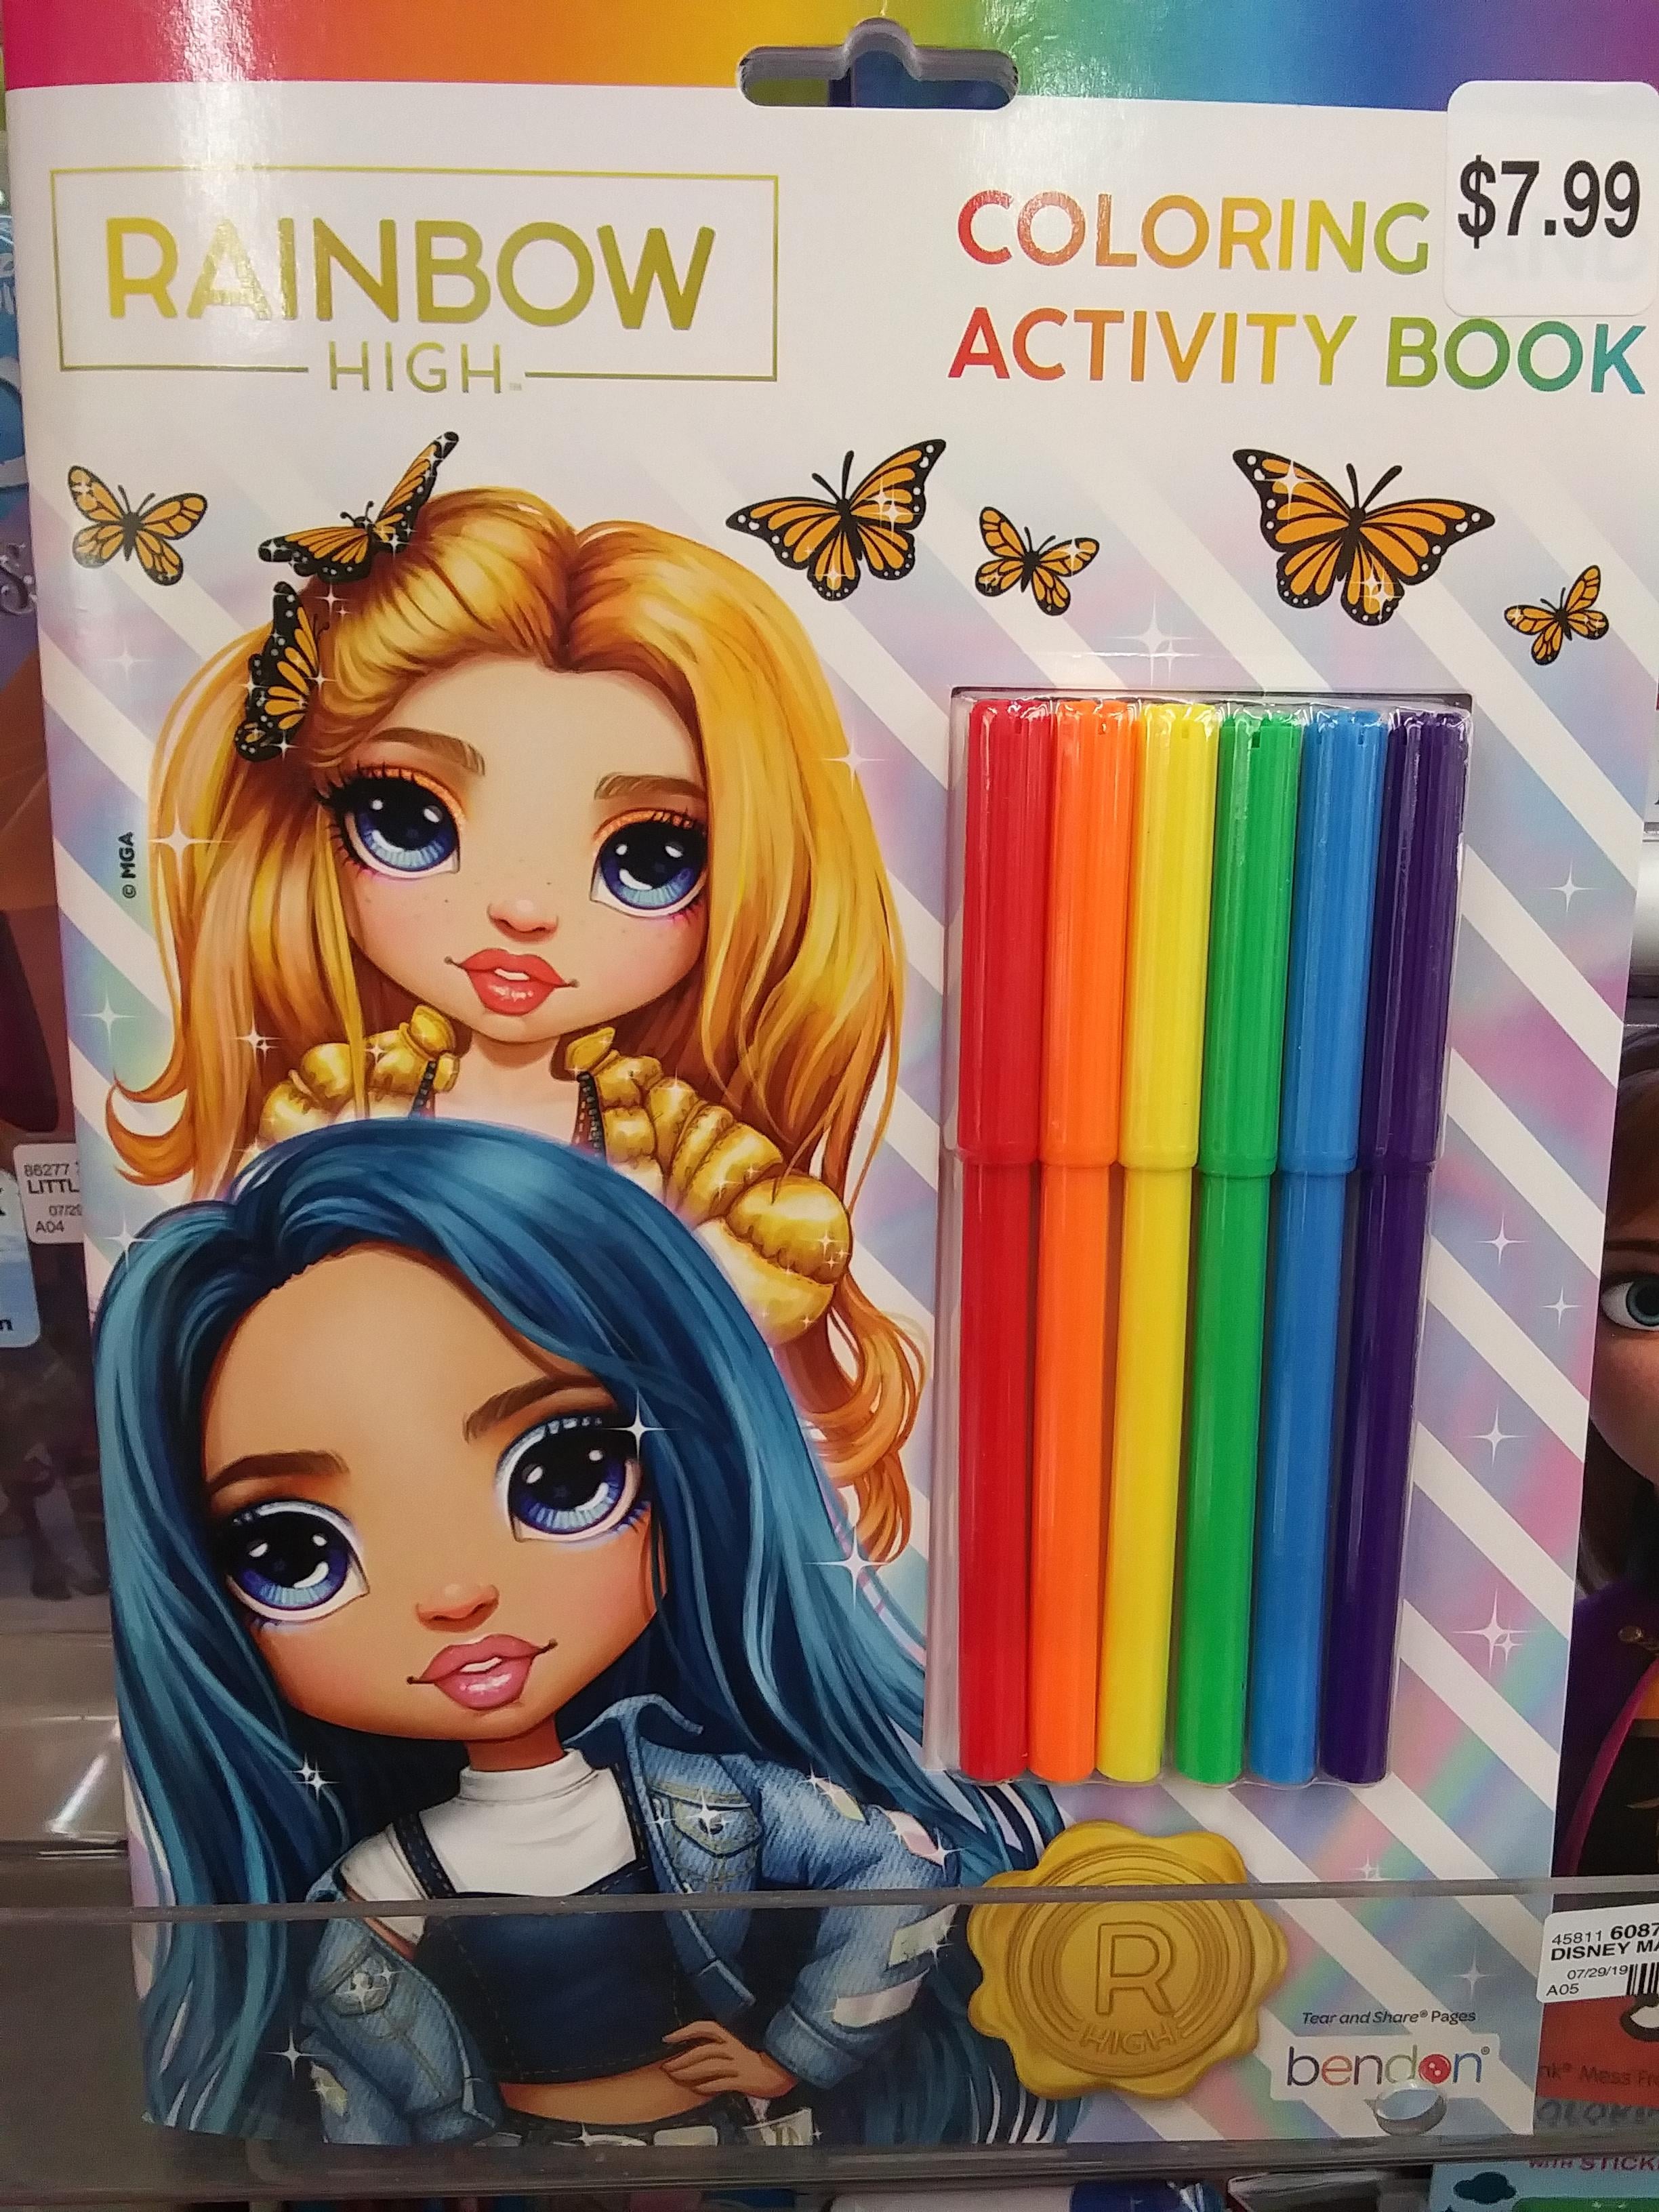 Rh coloring book found in cvs rrainbowhigh